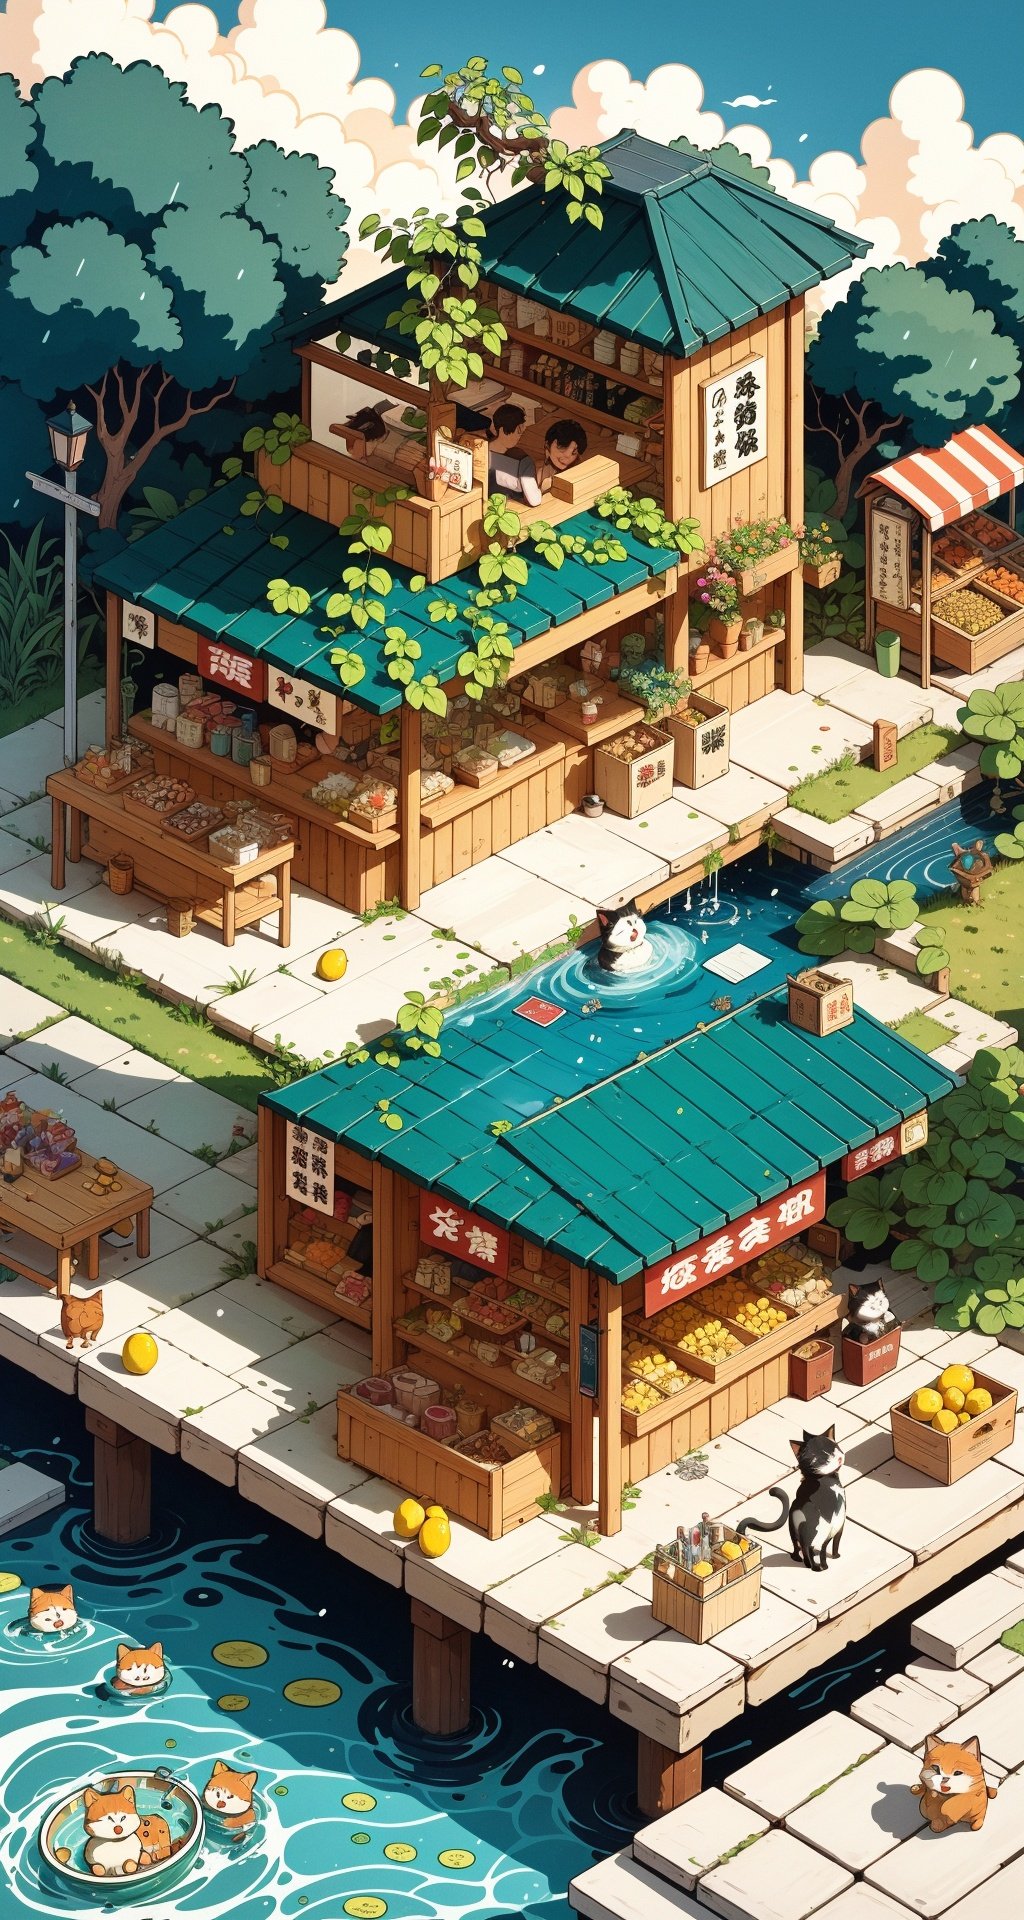 (Masterpiece),(Best Quality),highres,Beverage advertising, featuring a store, grocery store, unique yokai illustrations, flowers, vines, lemons, water, swimming pool, swimming circle, sunshade umbrella, detailed character design, cute cats, double story buildings, road signs, and vertical paintings